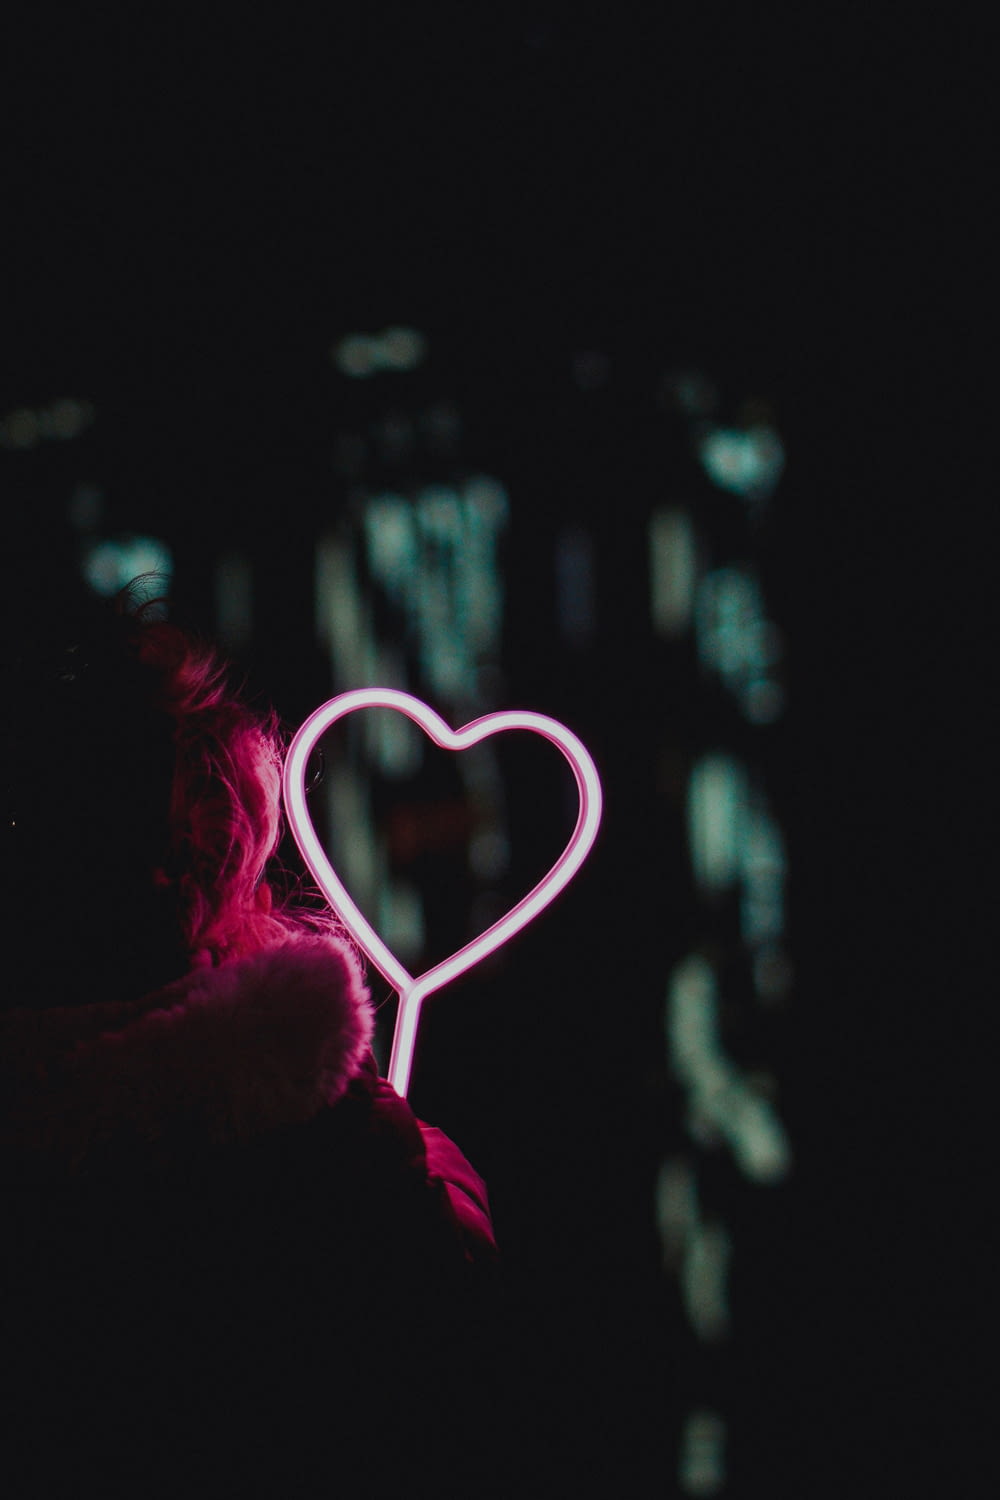 a person holding a heart shaped object in the dark